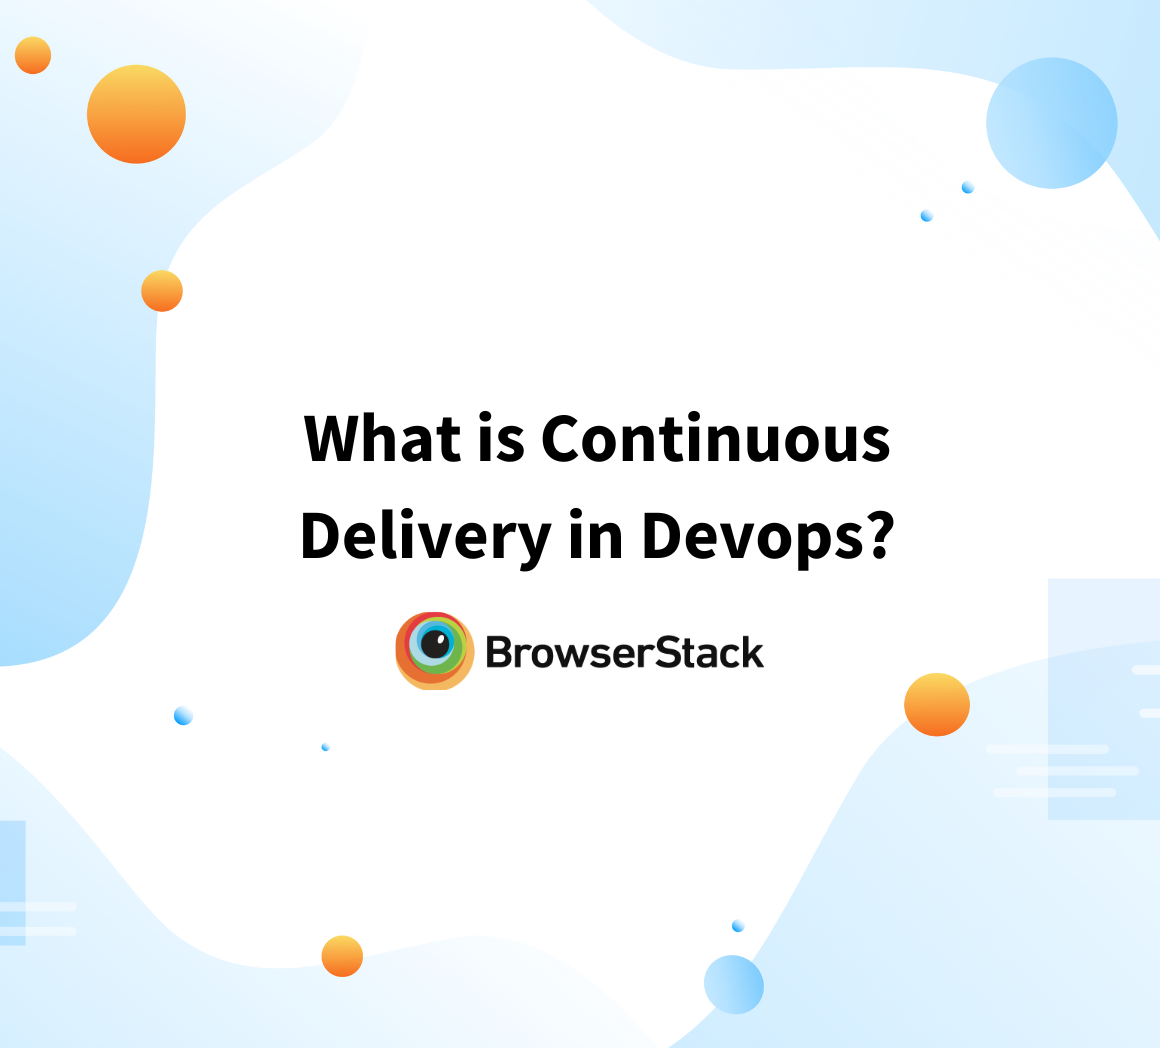 What is Continuous Delivery in Devops